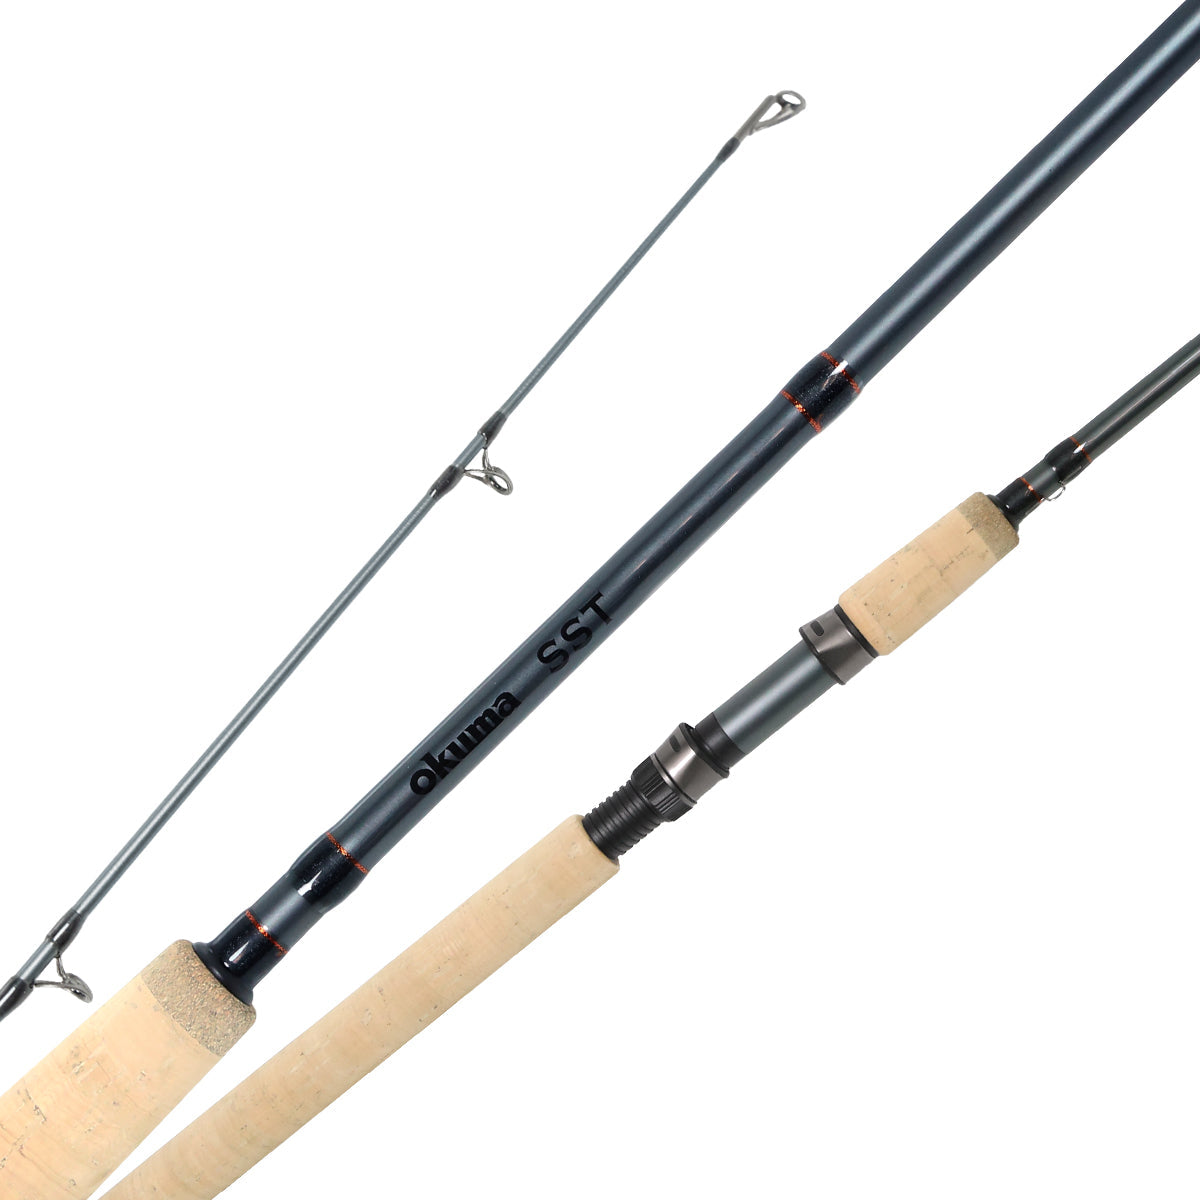 Ray Fishing Golden Feather Ultra Light Spinning Rods GF-S751UL 7'5 Ultra Light Fast 1/32-1/4oz 1-7lb 1 Piece